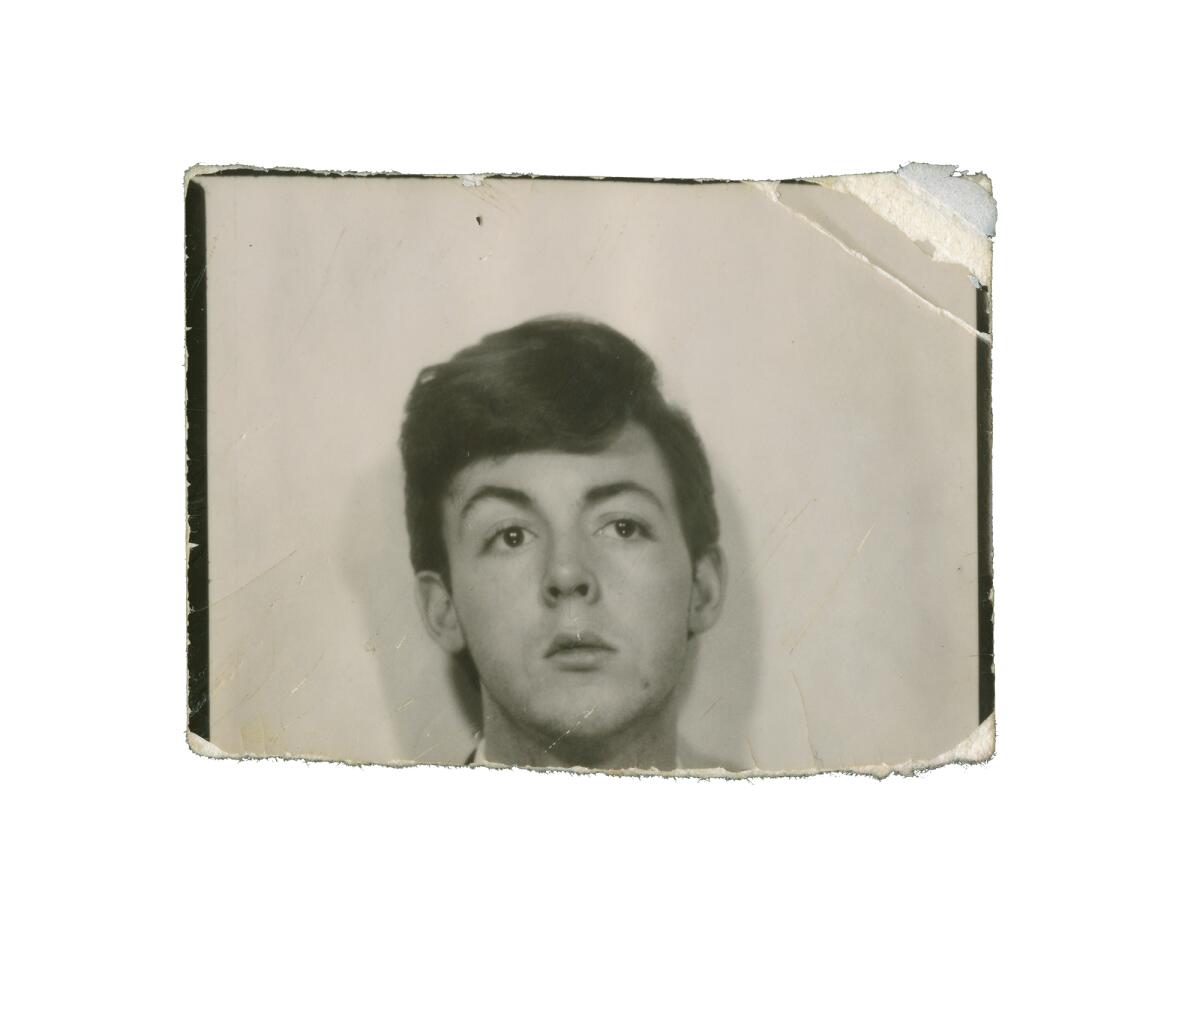 A passport-style photograph of Paul McCartney from the late 1950s.